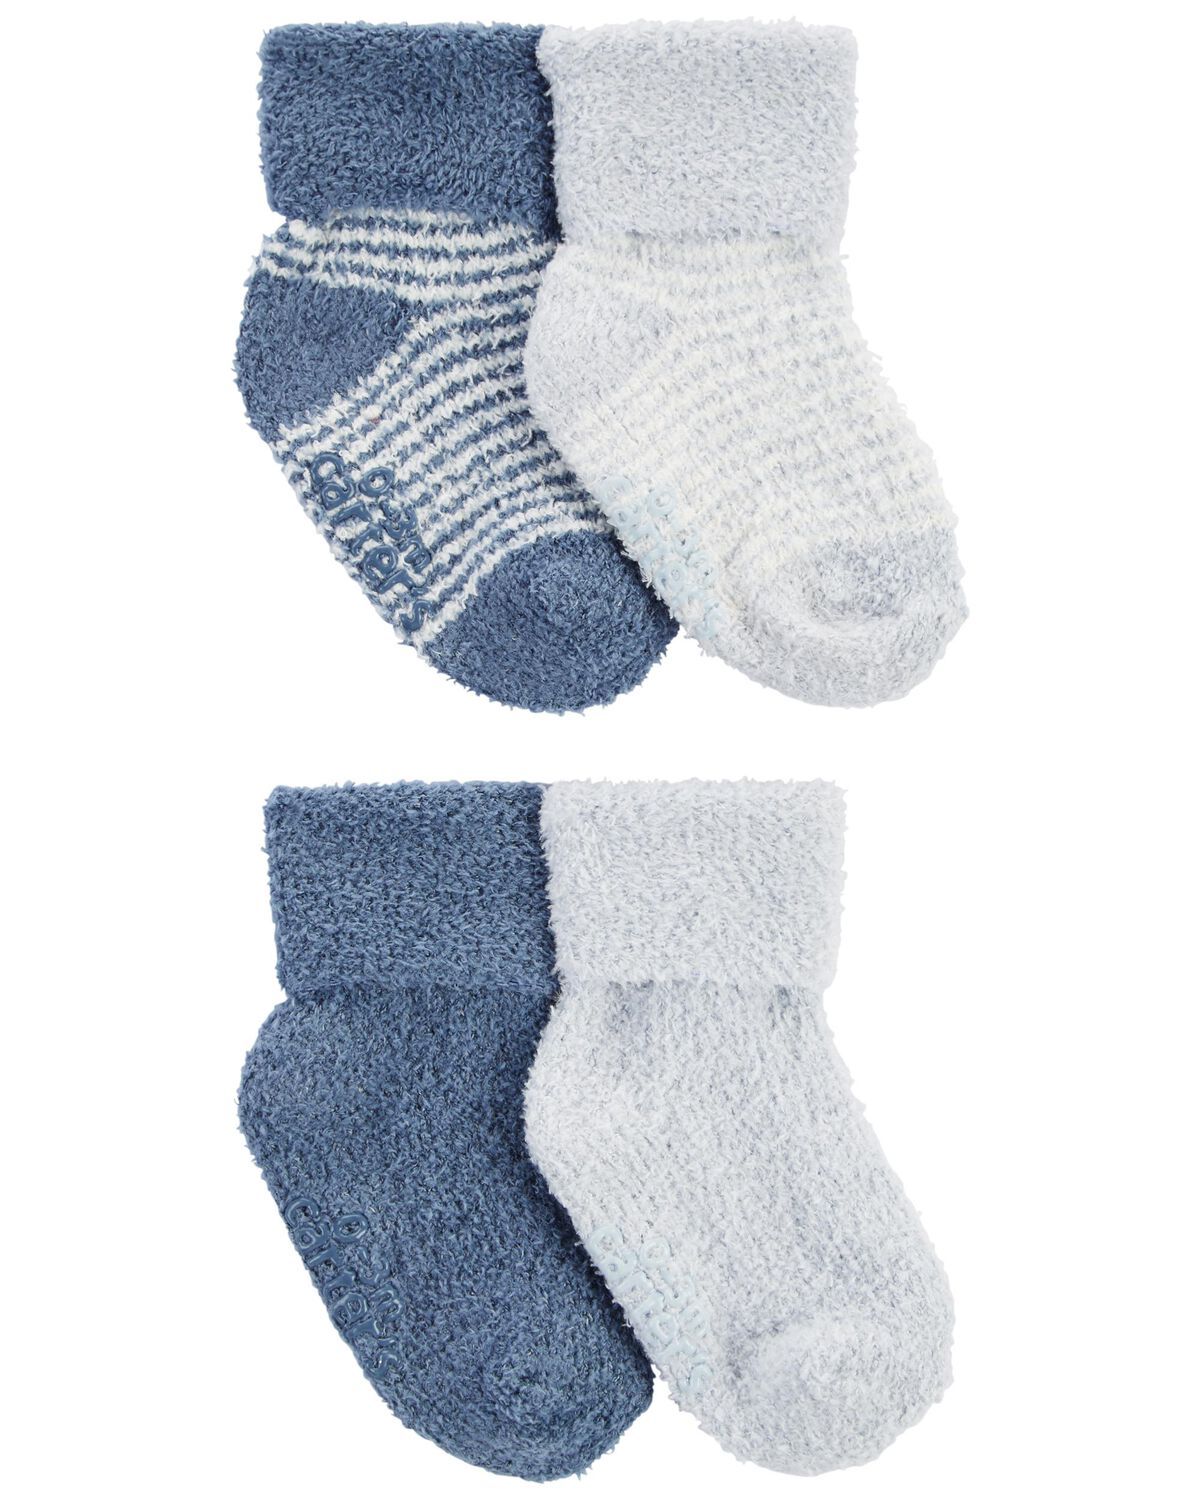 Blue Baby 4-Pack Foldover Chenille Booties | carters.com | Carter's